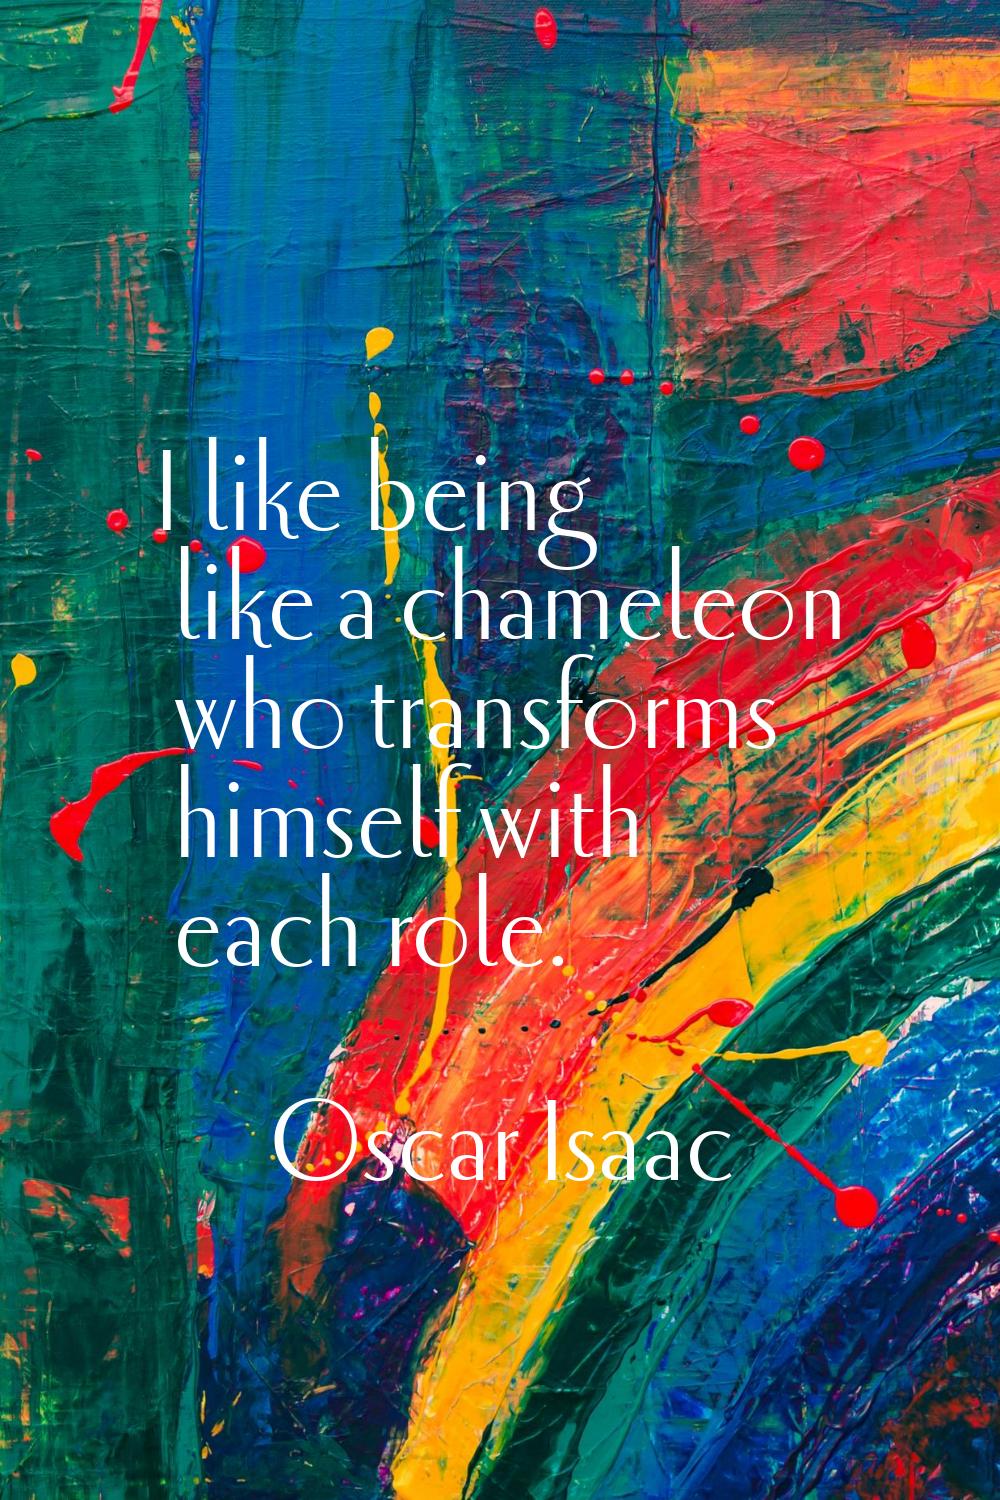 I like being like a chameleon who transforms himself with each role.